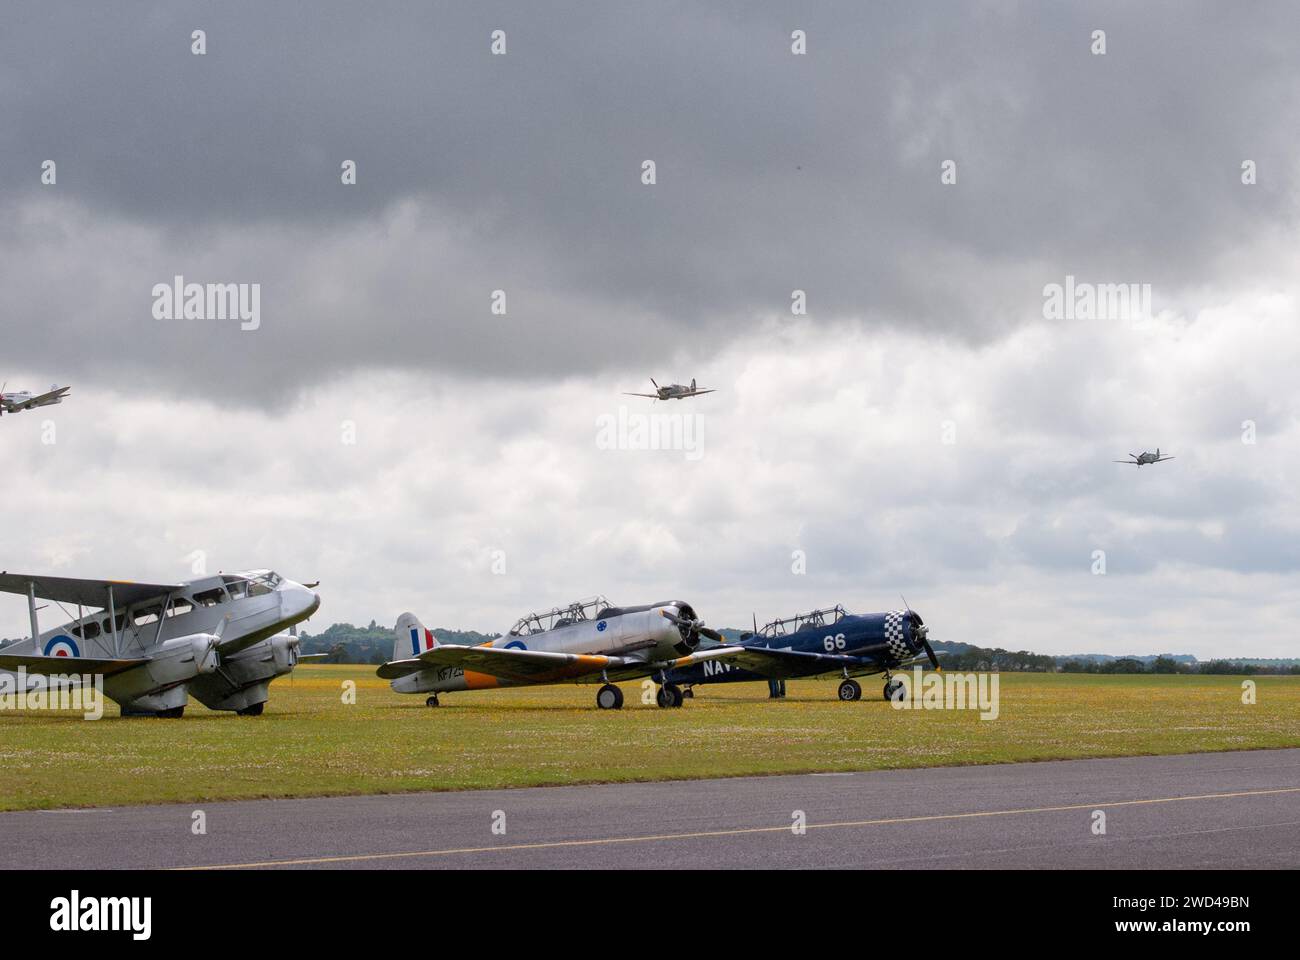 Spitfires dogfight flying low during airshow of vintage aircraft. Stock Photo